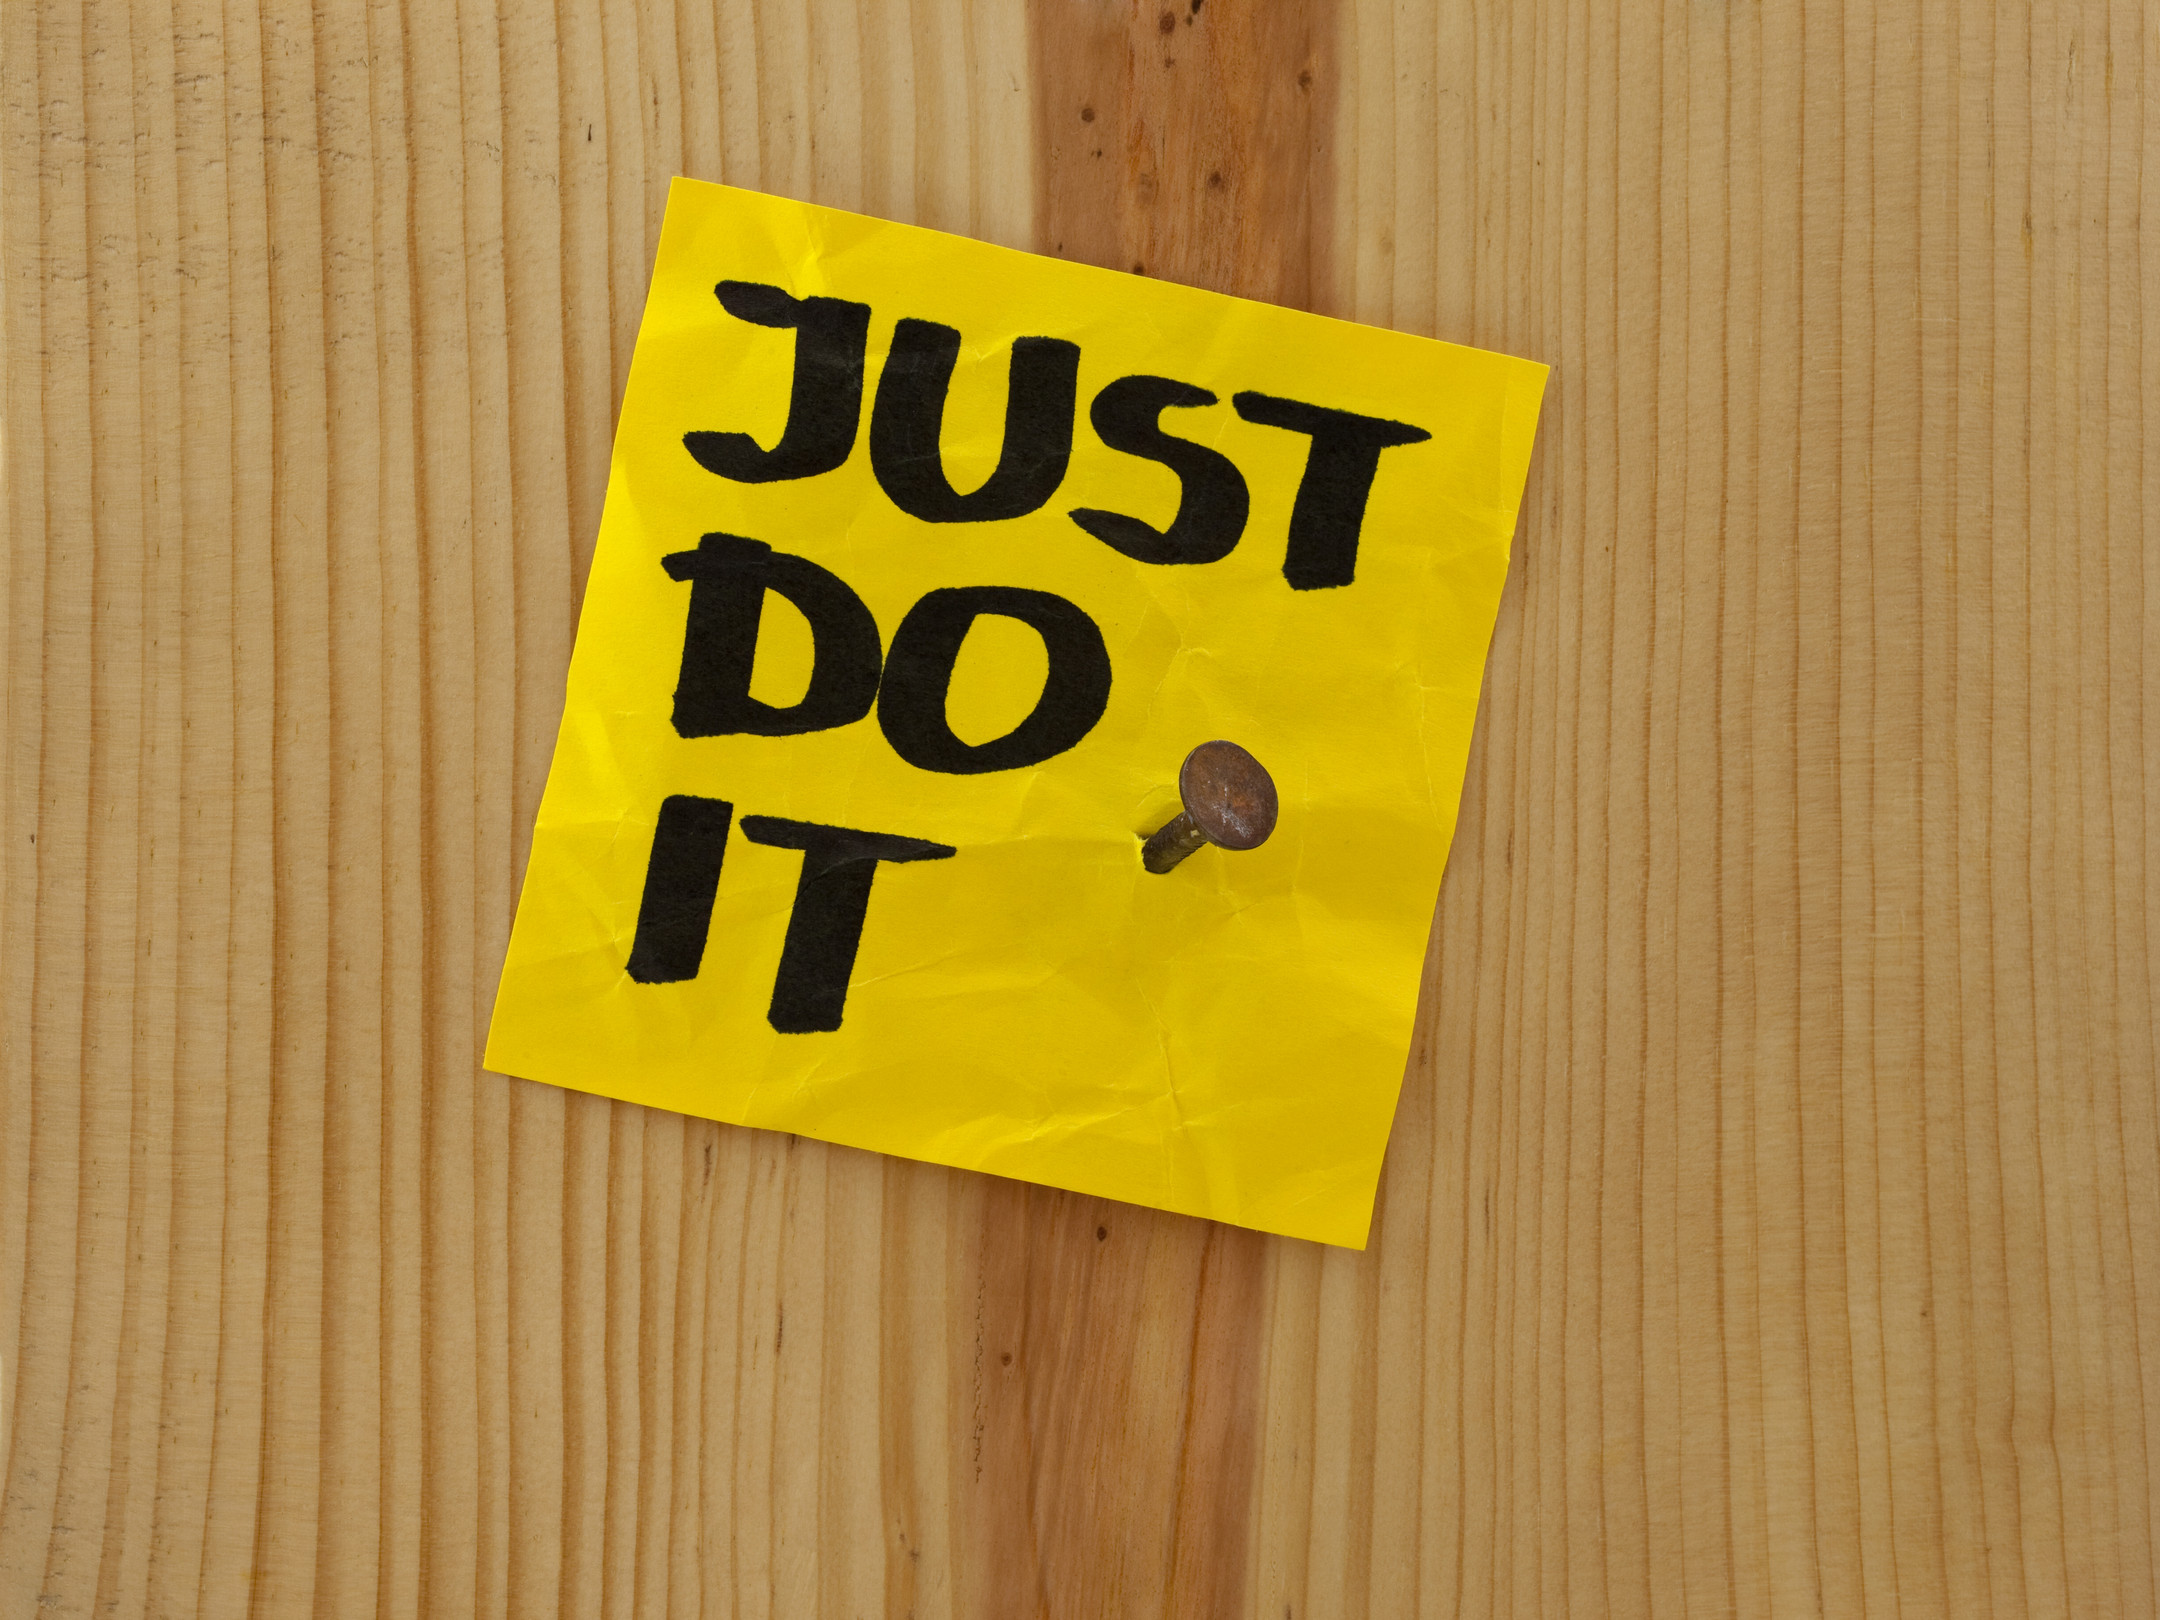 just do it wallpaper,yellow,text,font,post it note,wood